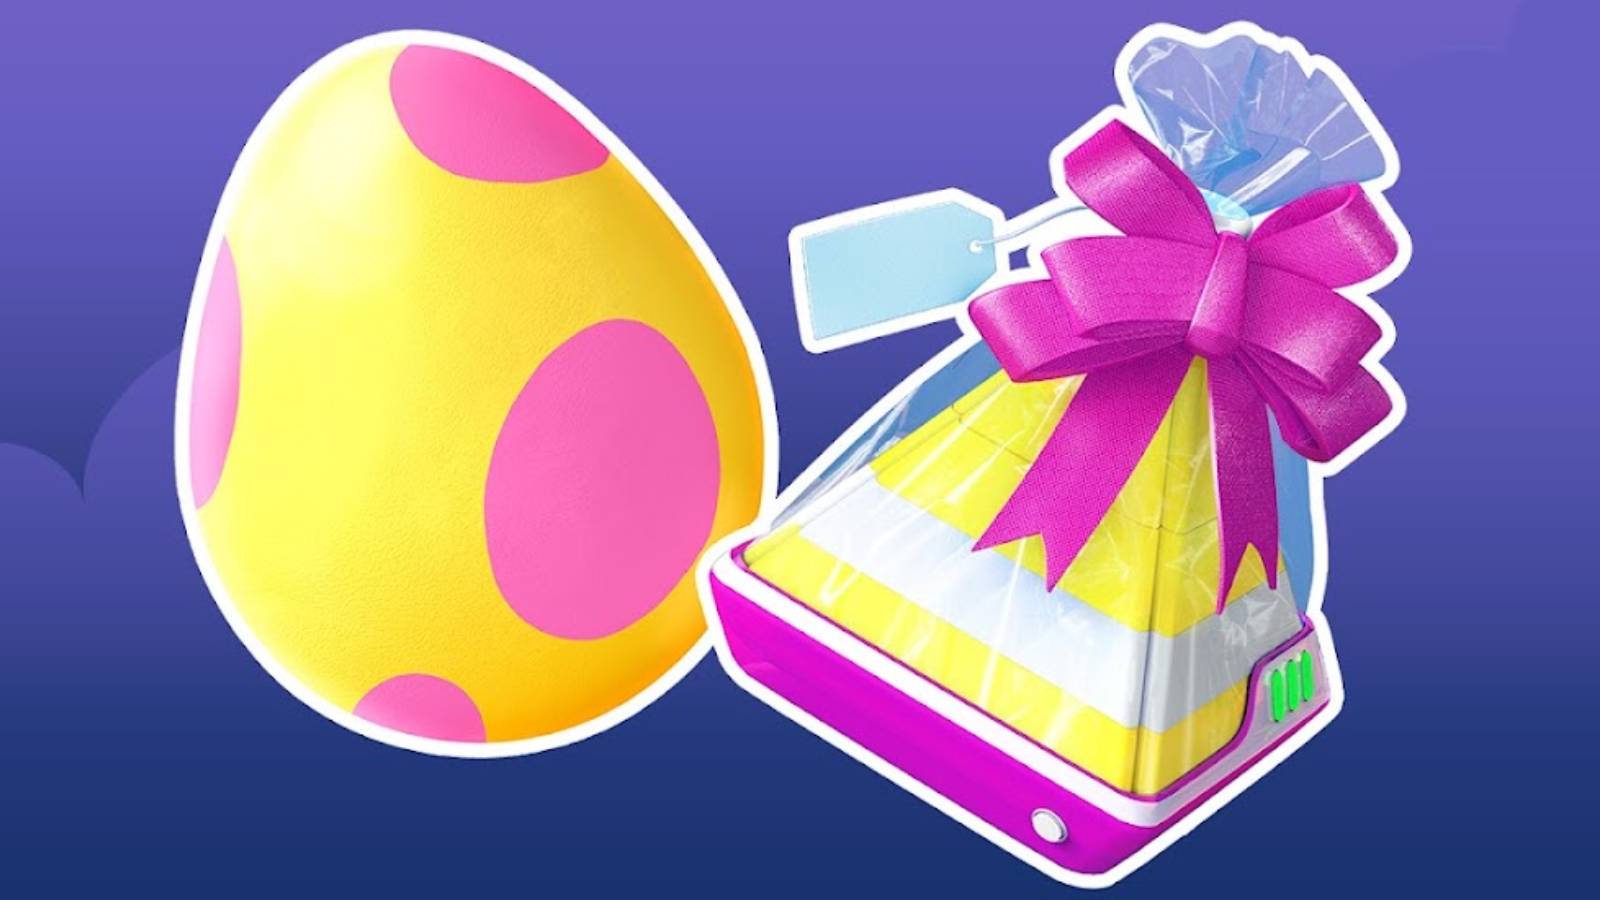 Key art for Pokemon Go shows an Egg and a Gift next to each other